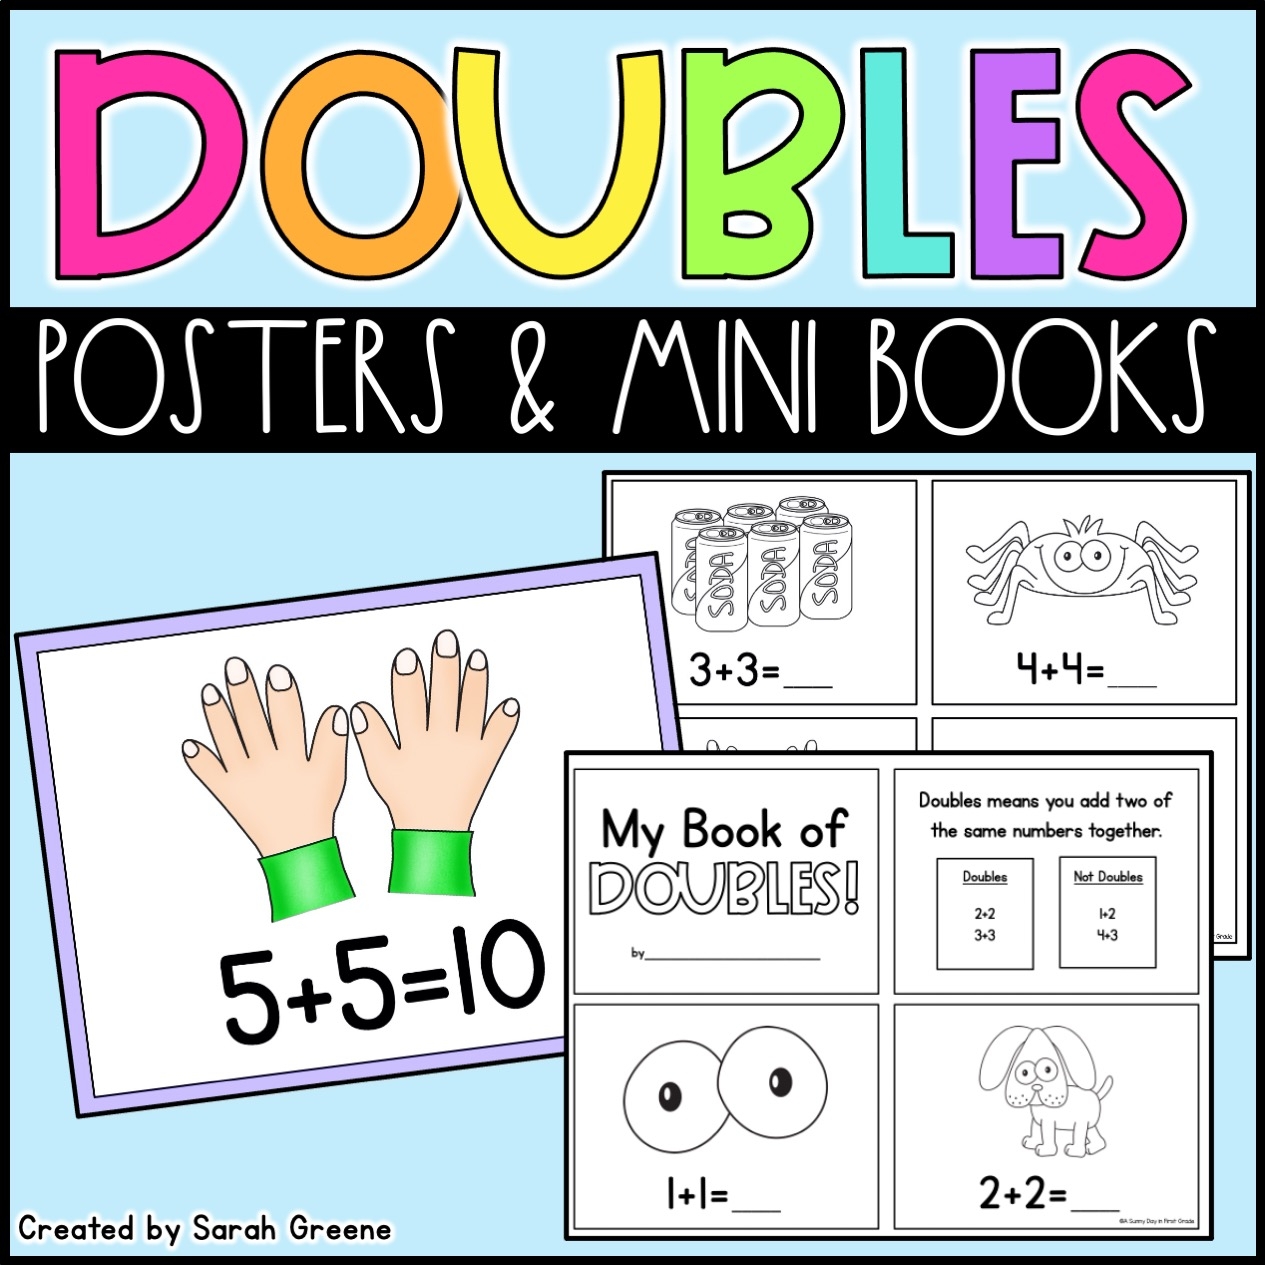 Doubles Facts Posters Mini Book Made By Teachers